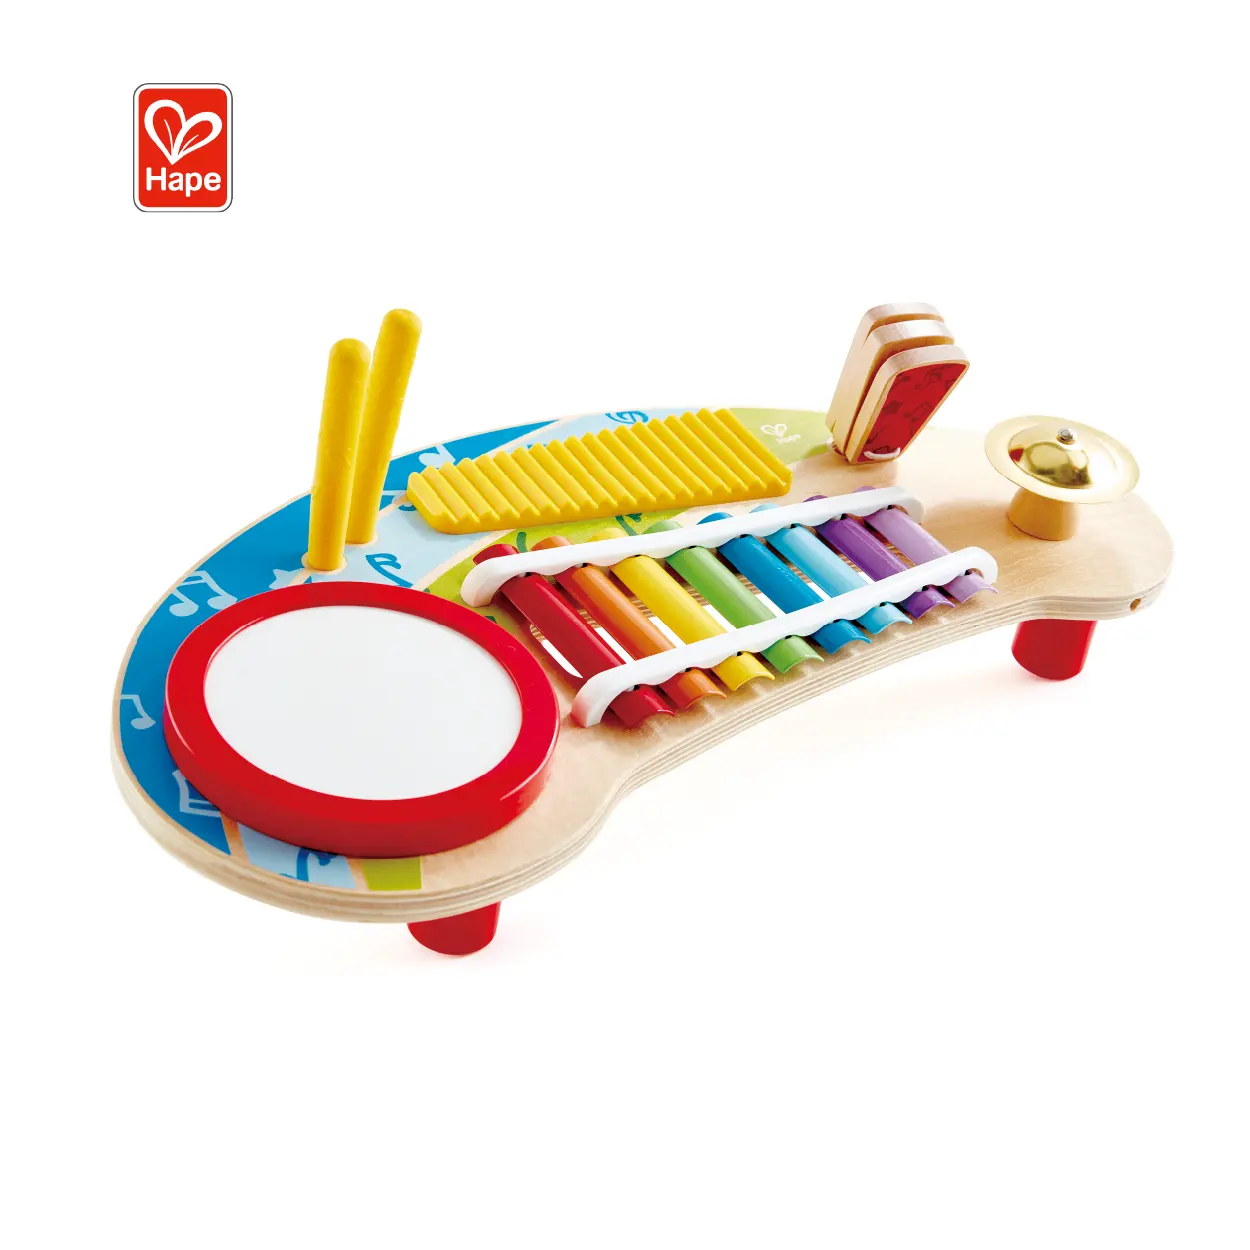 Plastic Mini Toddlers Musical Pounding Instruments Pleasant Sound Set Toy